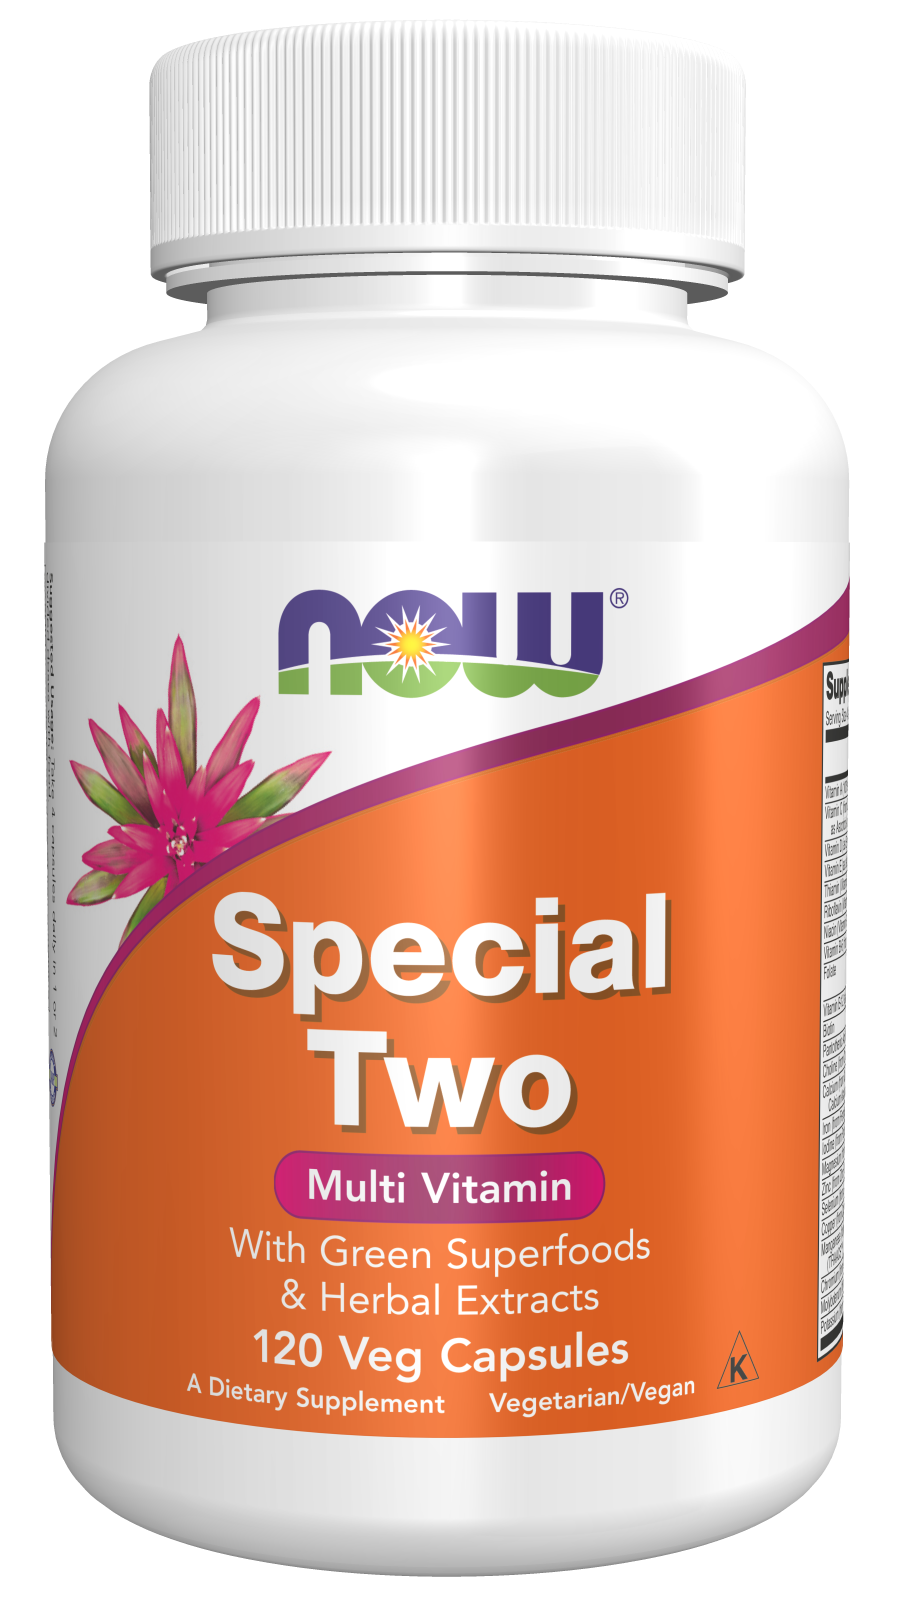 Special Two Veg Capsules